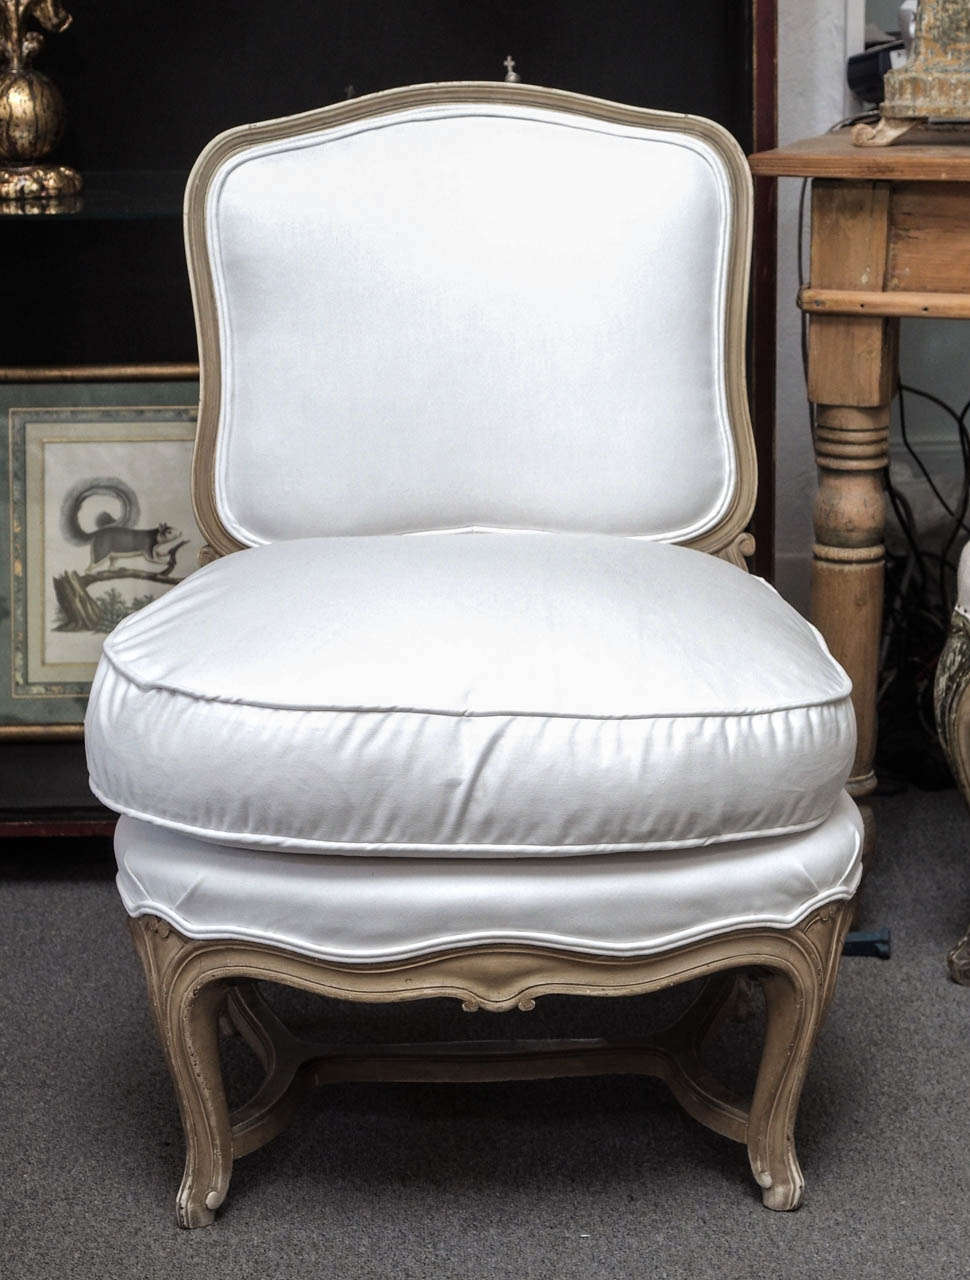 Pair of carved, painted French slipperchairs in the Jansen style;  the upholstery has been replaced. The backs and seats are upholstered and each has a separate seat cushion.